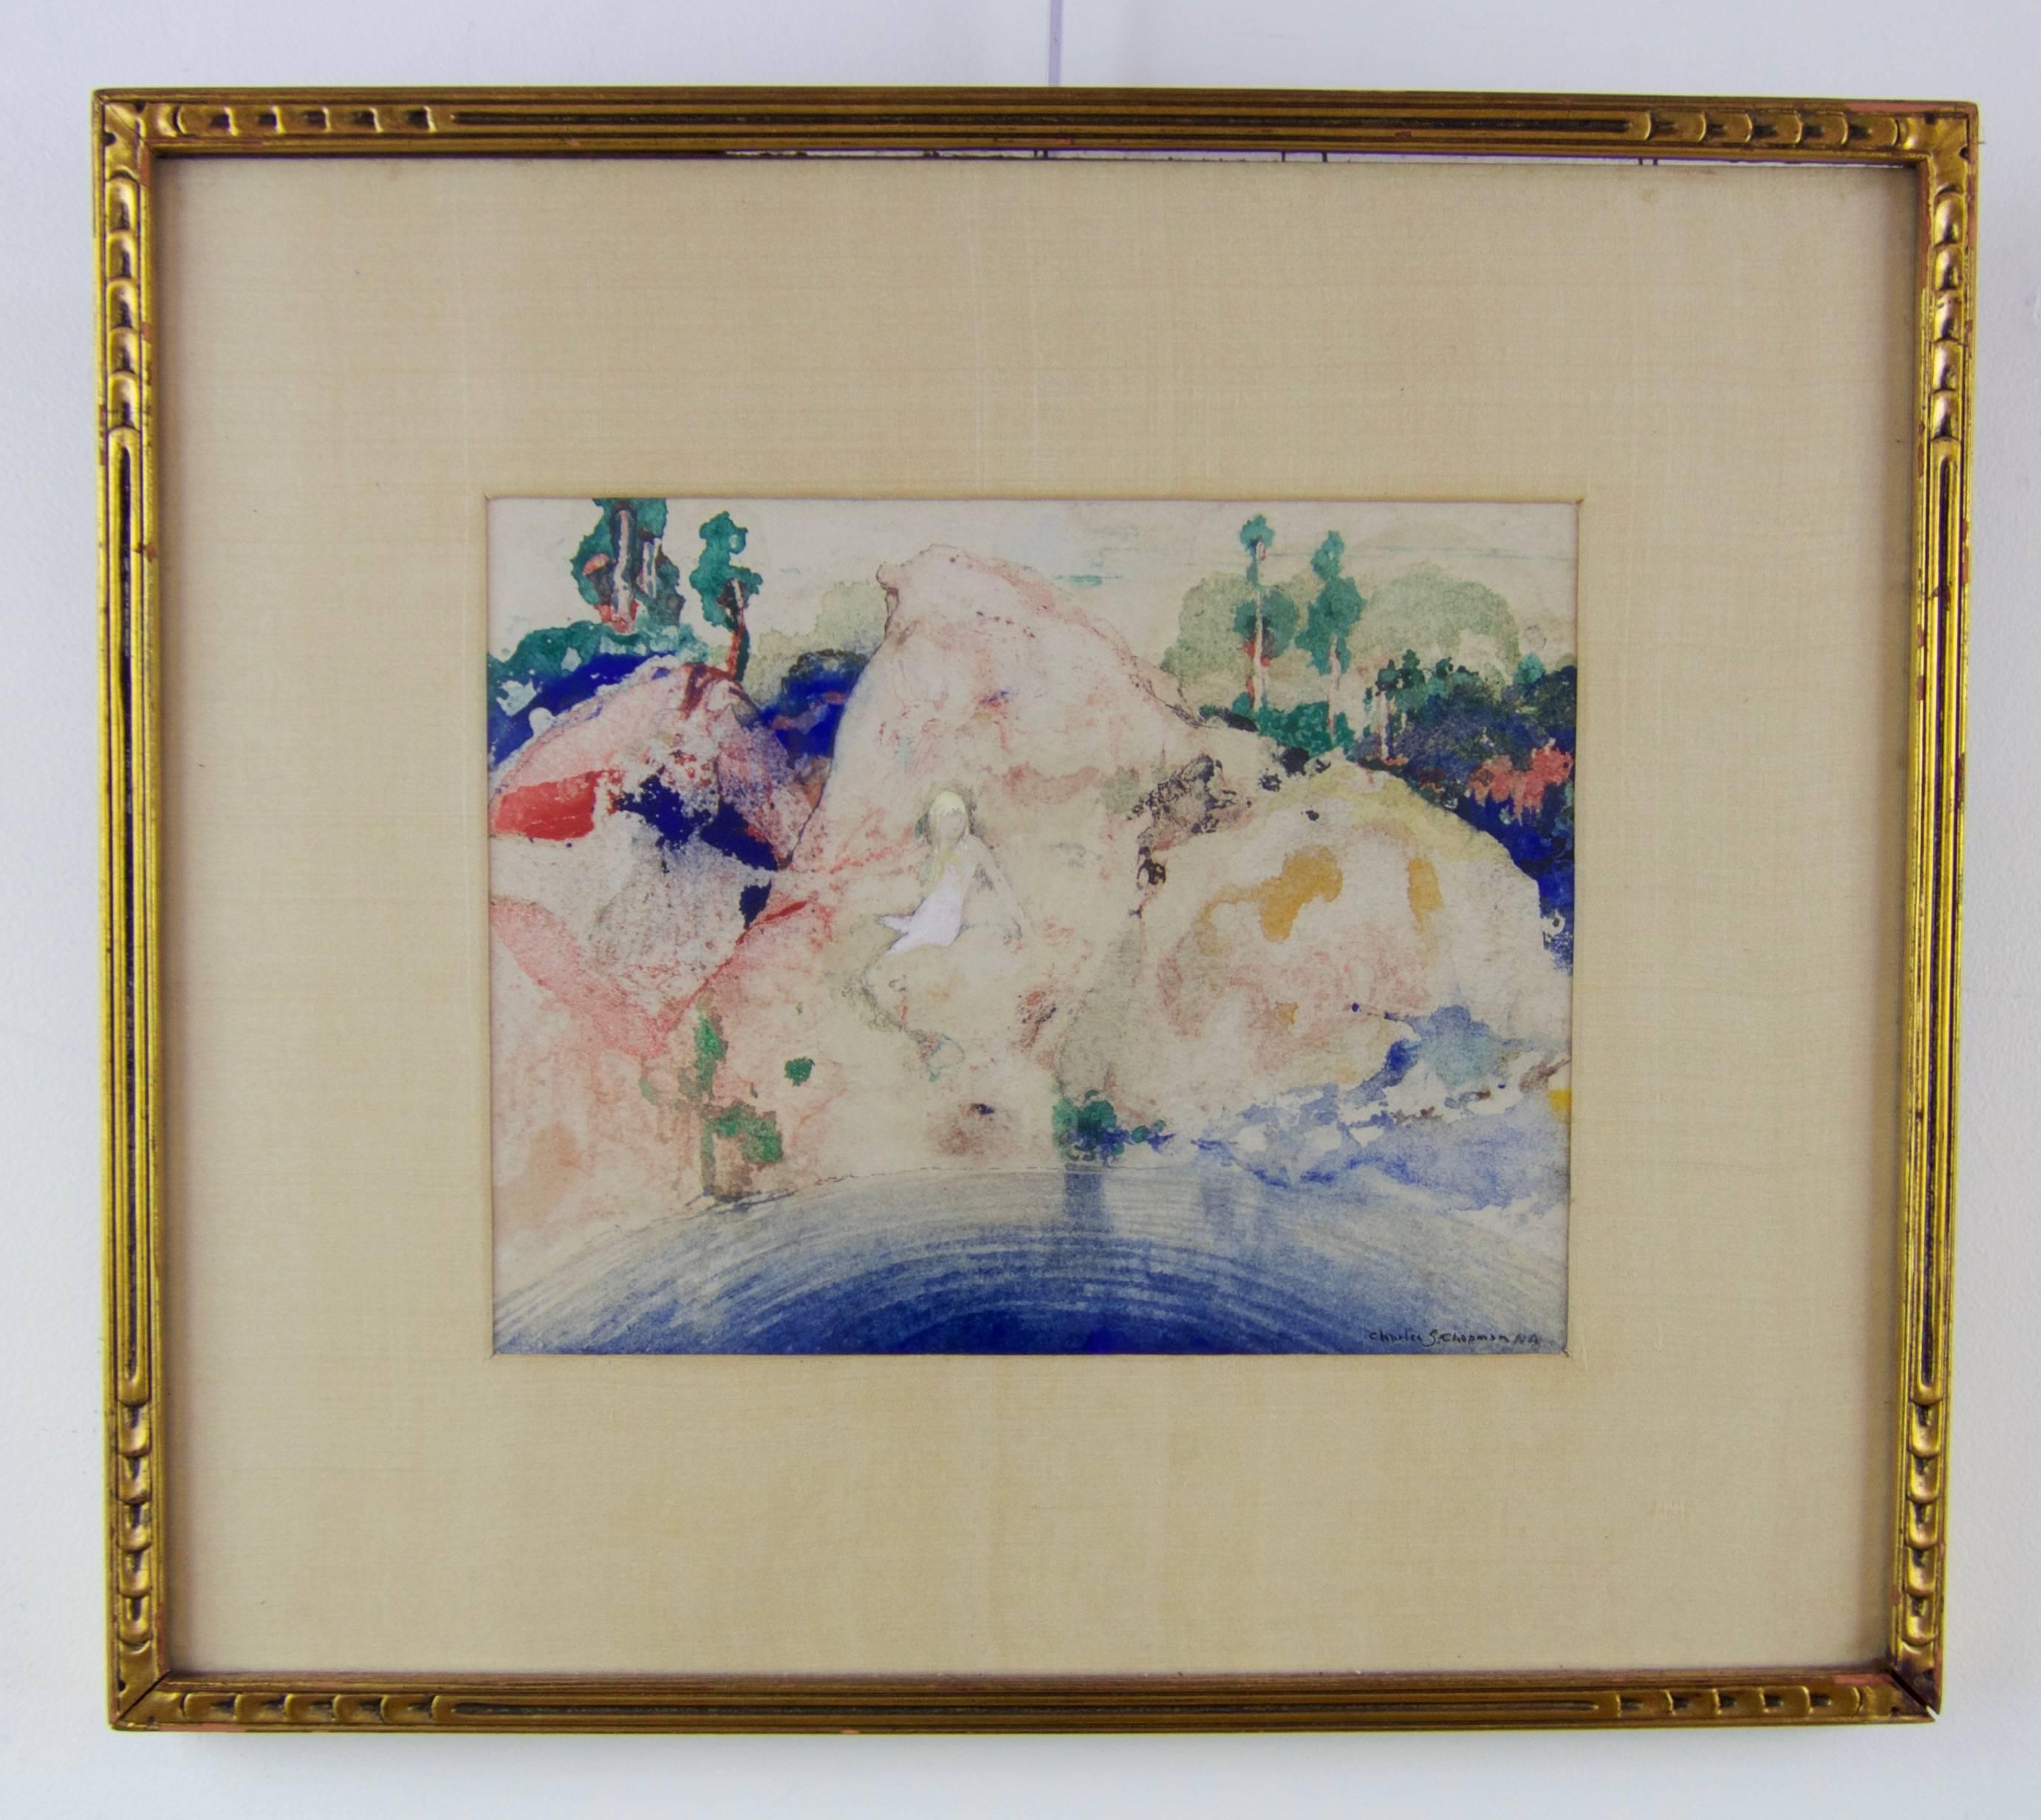 Early American modernist painting - Painting by Charles Shepard Chapman